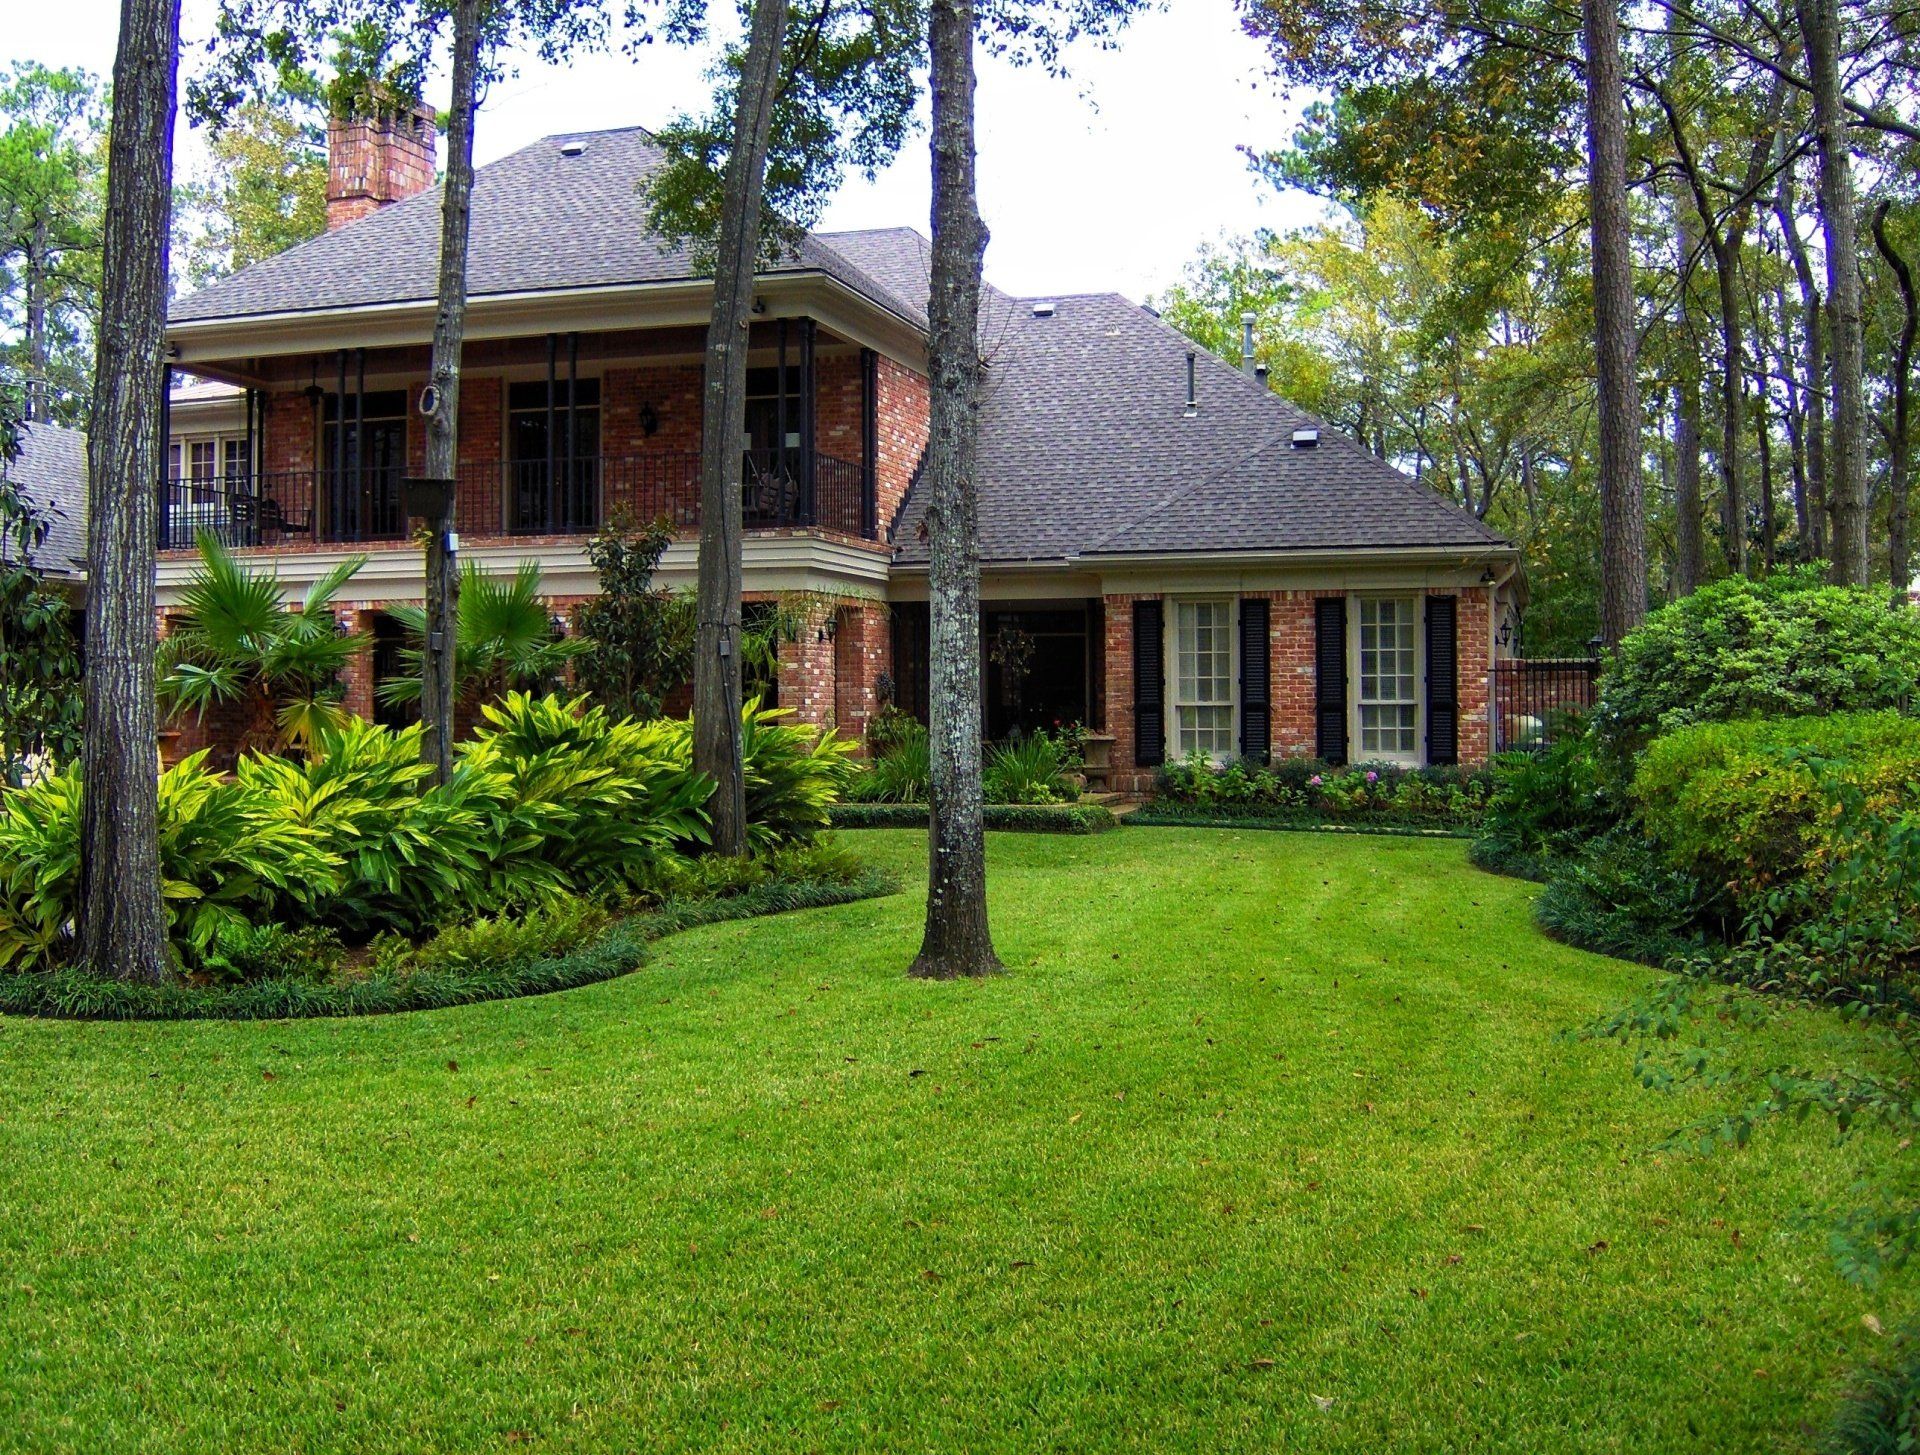 Landscaping Service in Houston, TX